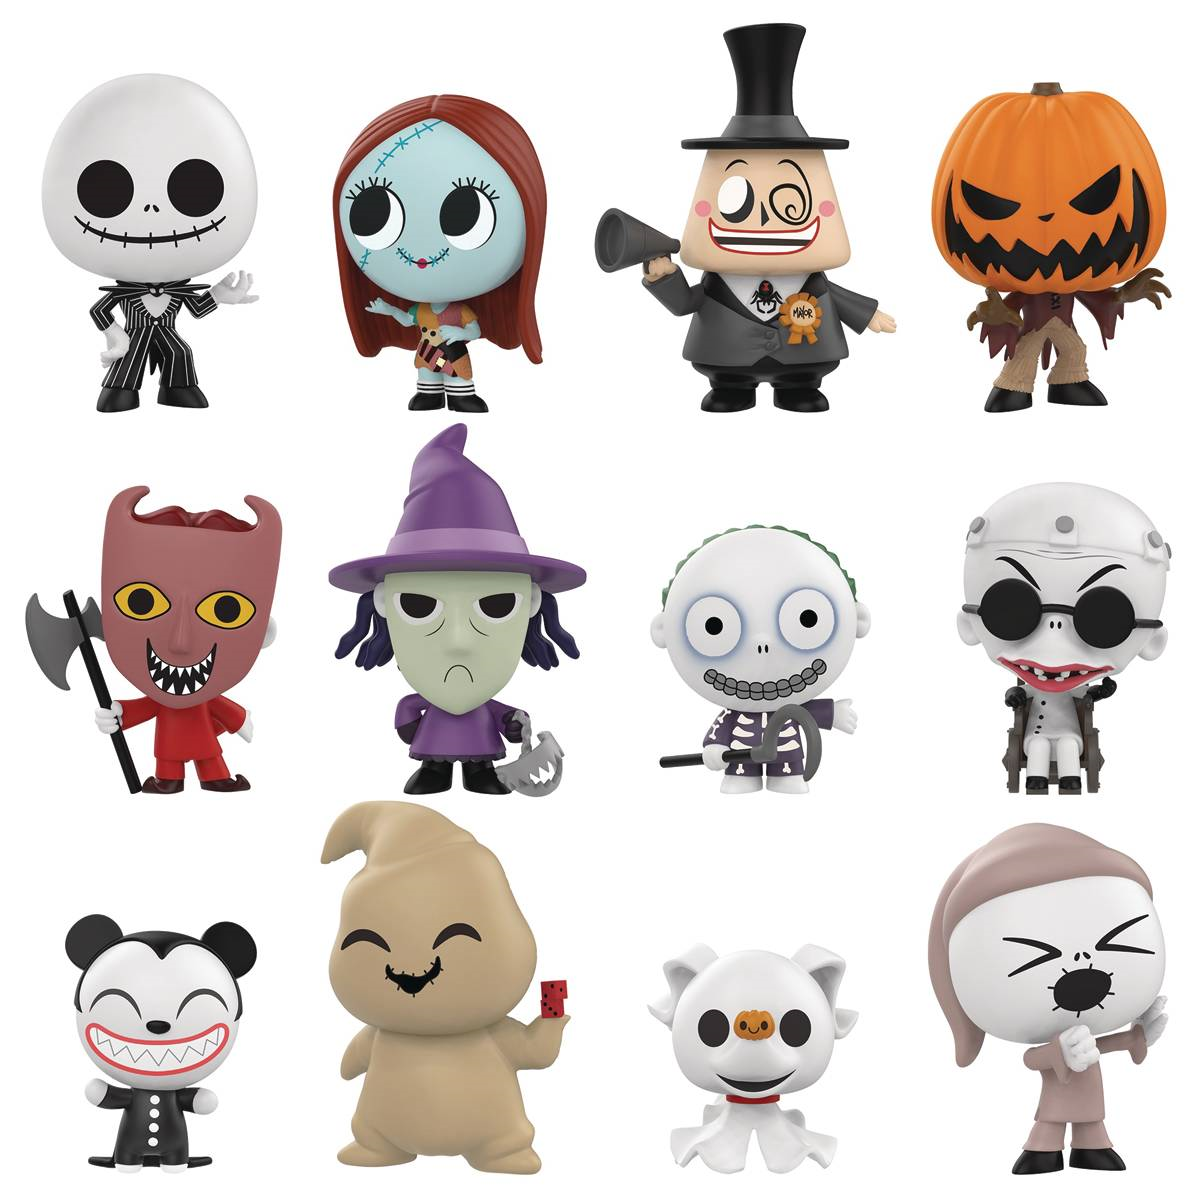 The Nightmare Before Christmas Disney Mystery Minis by Funko